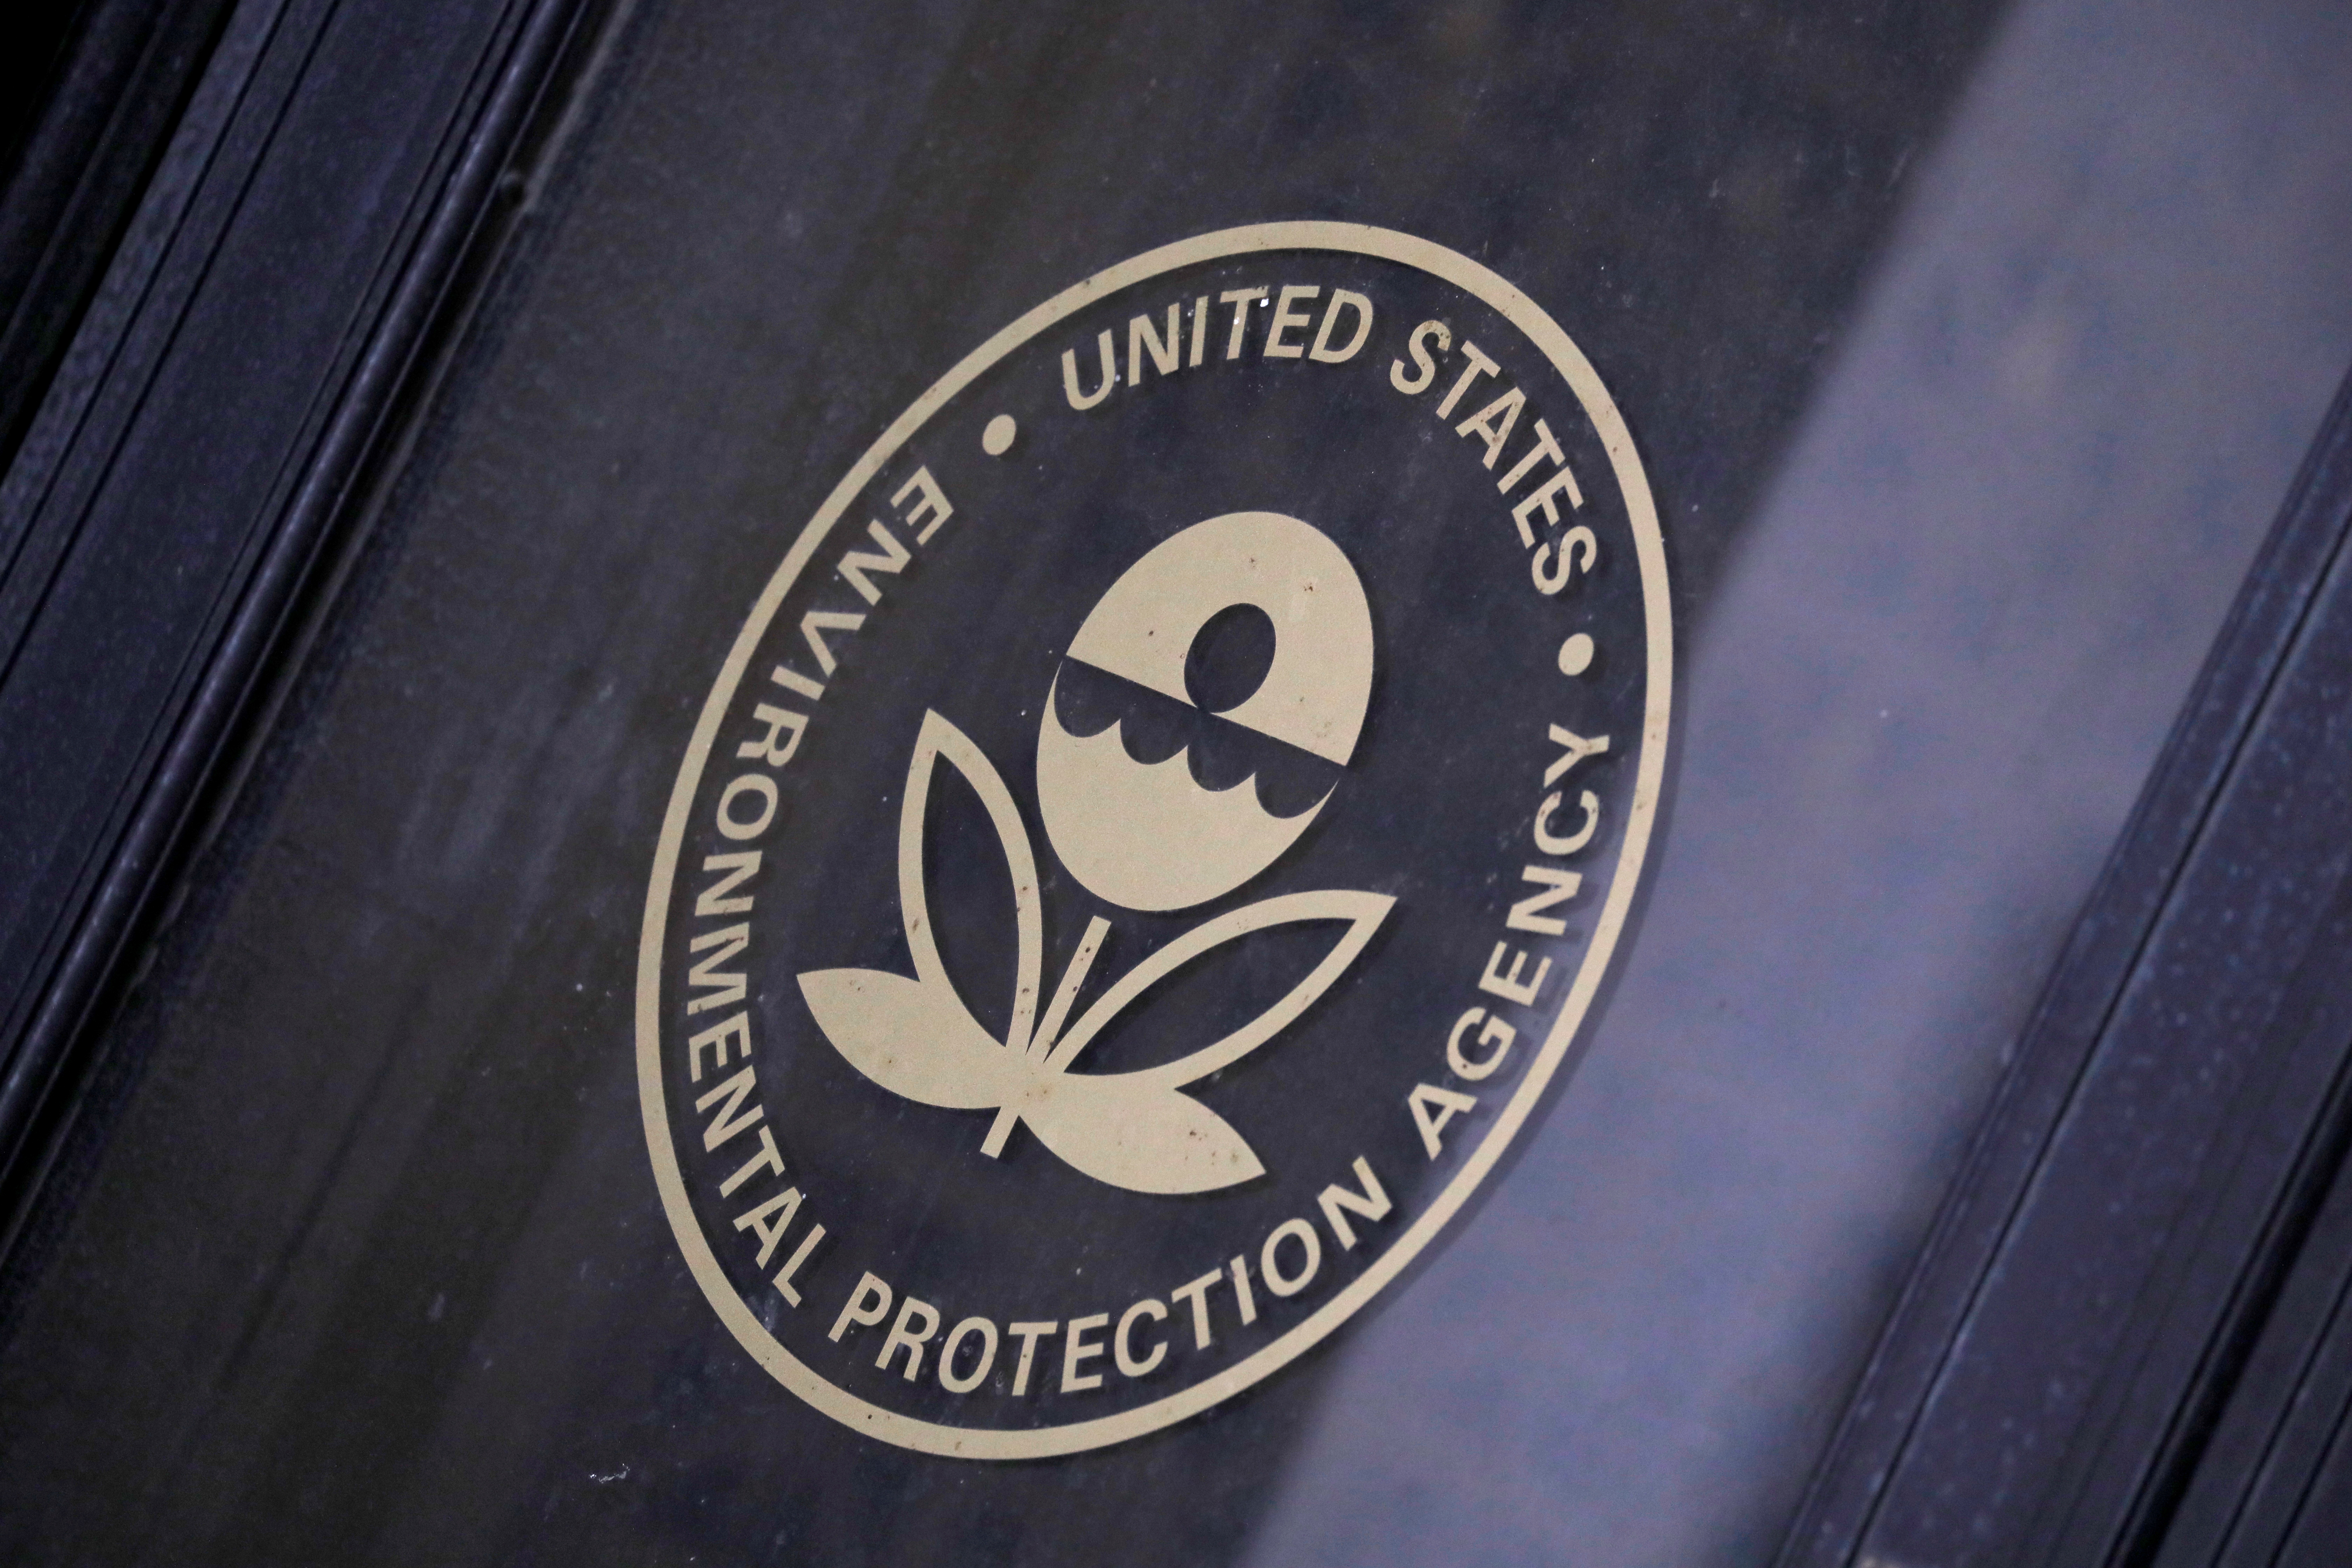 Signage is seen at the headquarters of the United States Environmental Protection Agency (EPA) in Washington, D.C., U.S., May 10, 2021. REUTERS/Andrew Kelly